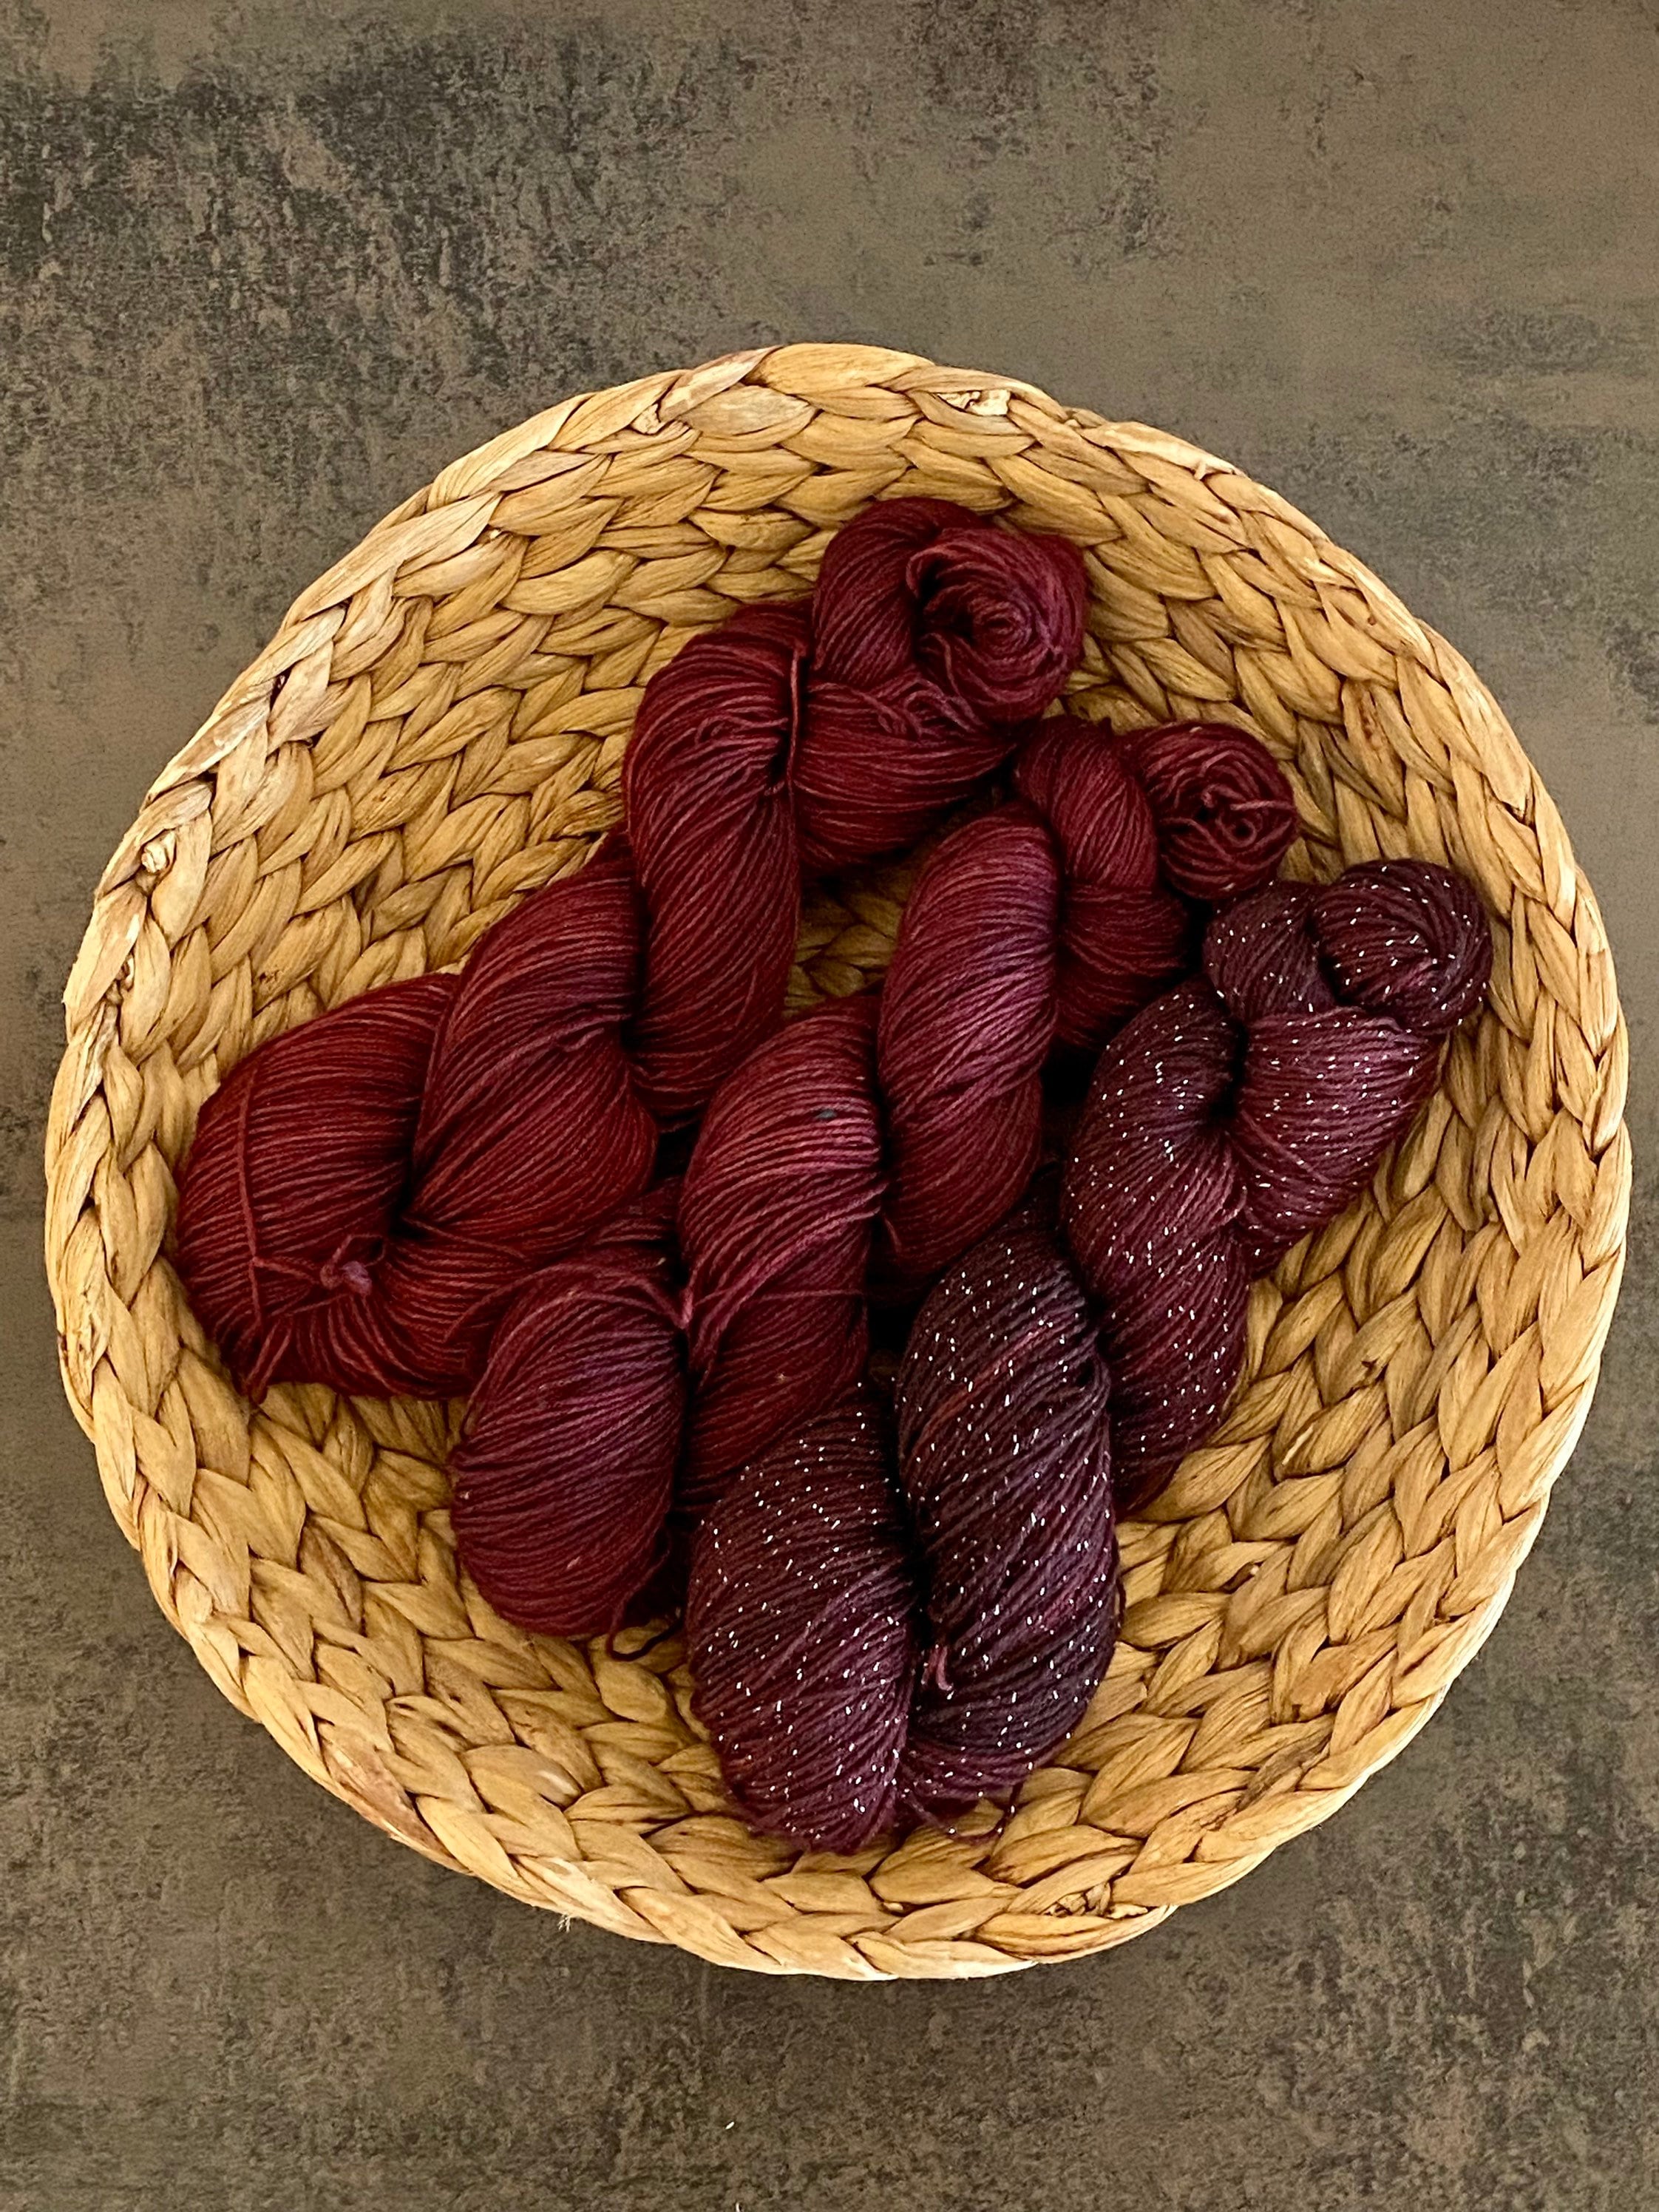 Bright red wool yarn in cones